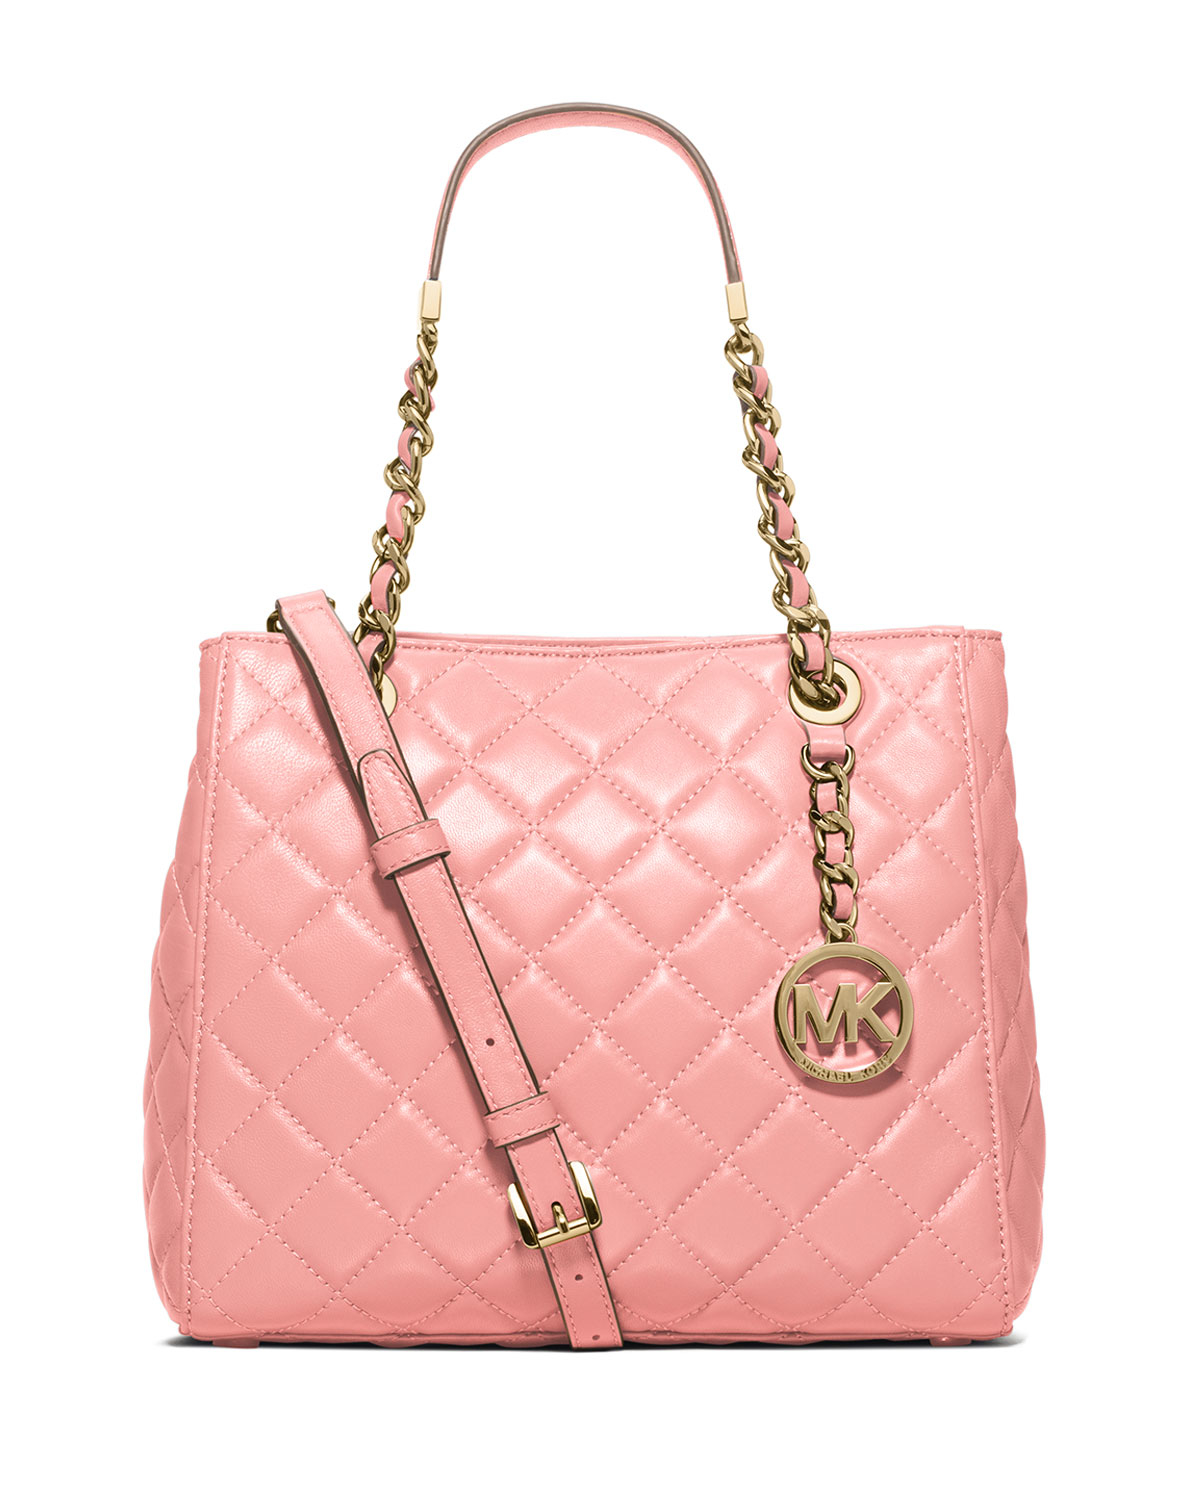 MICHAEL Michael Kors Susannah Small Quilted Tote Bag in Pink - Lyst